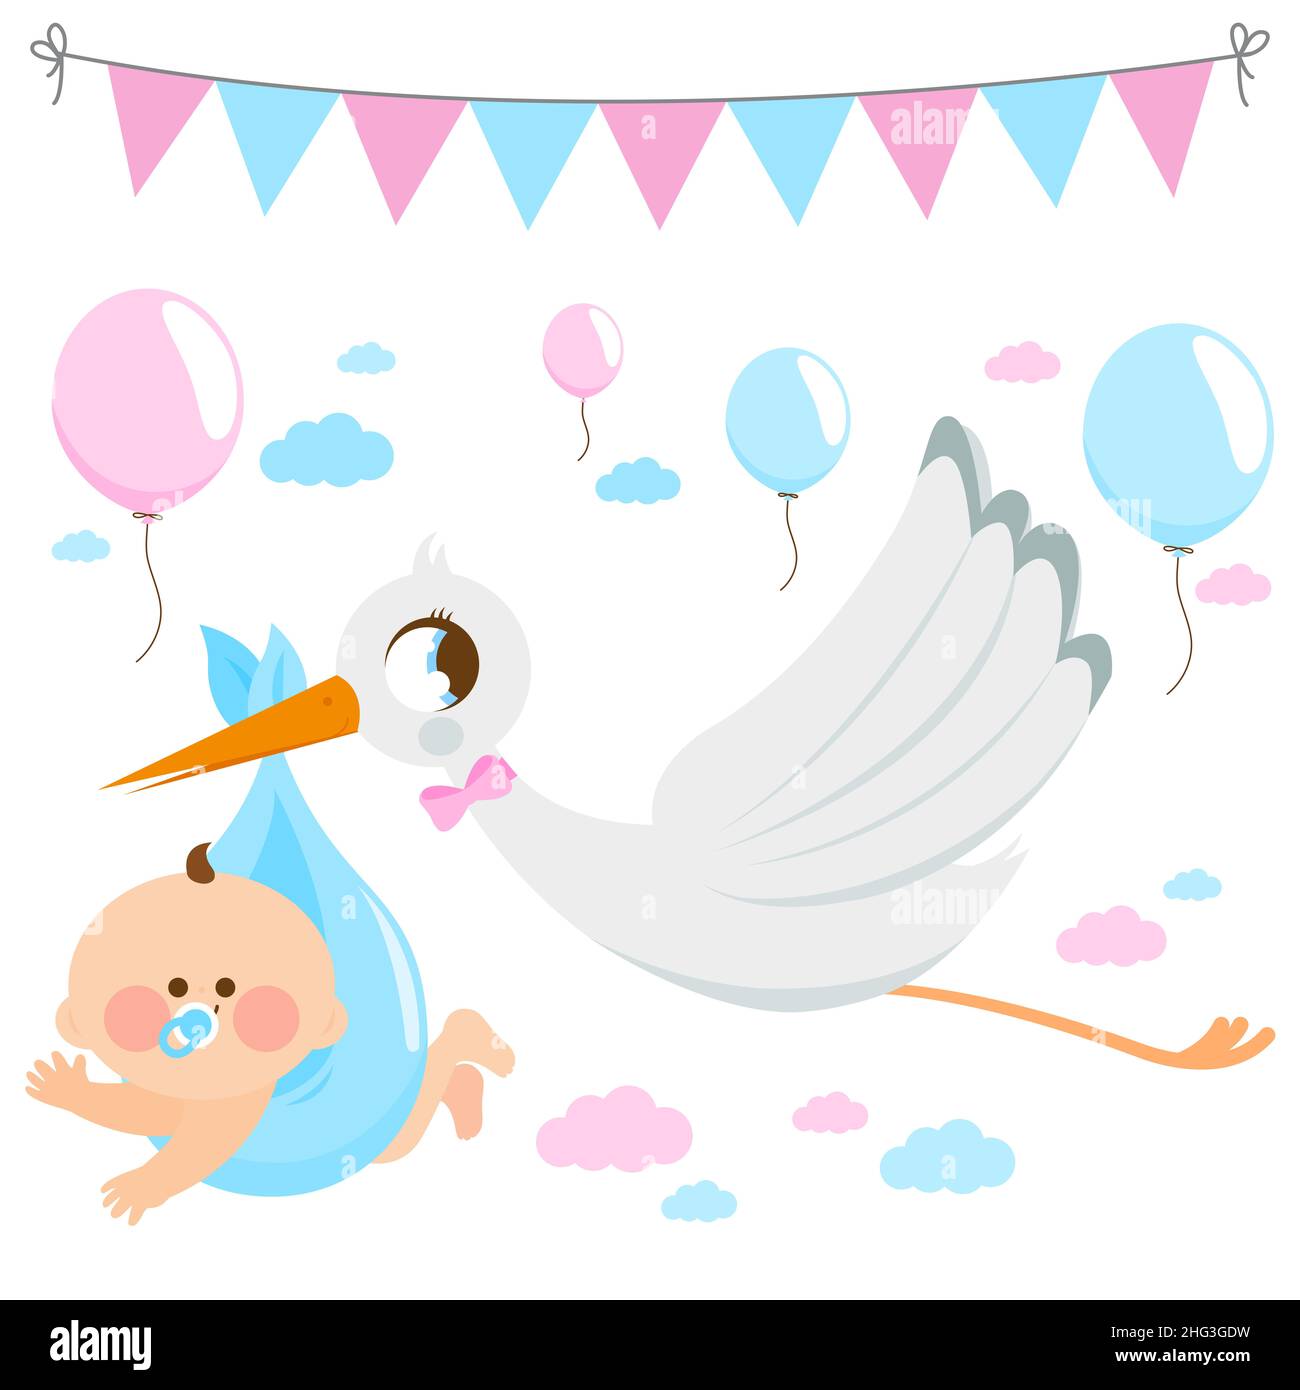 Stork delivering a new baby. Illustration collection Stock Photo